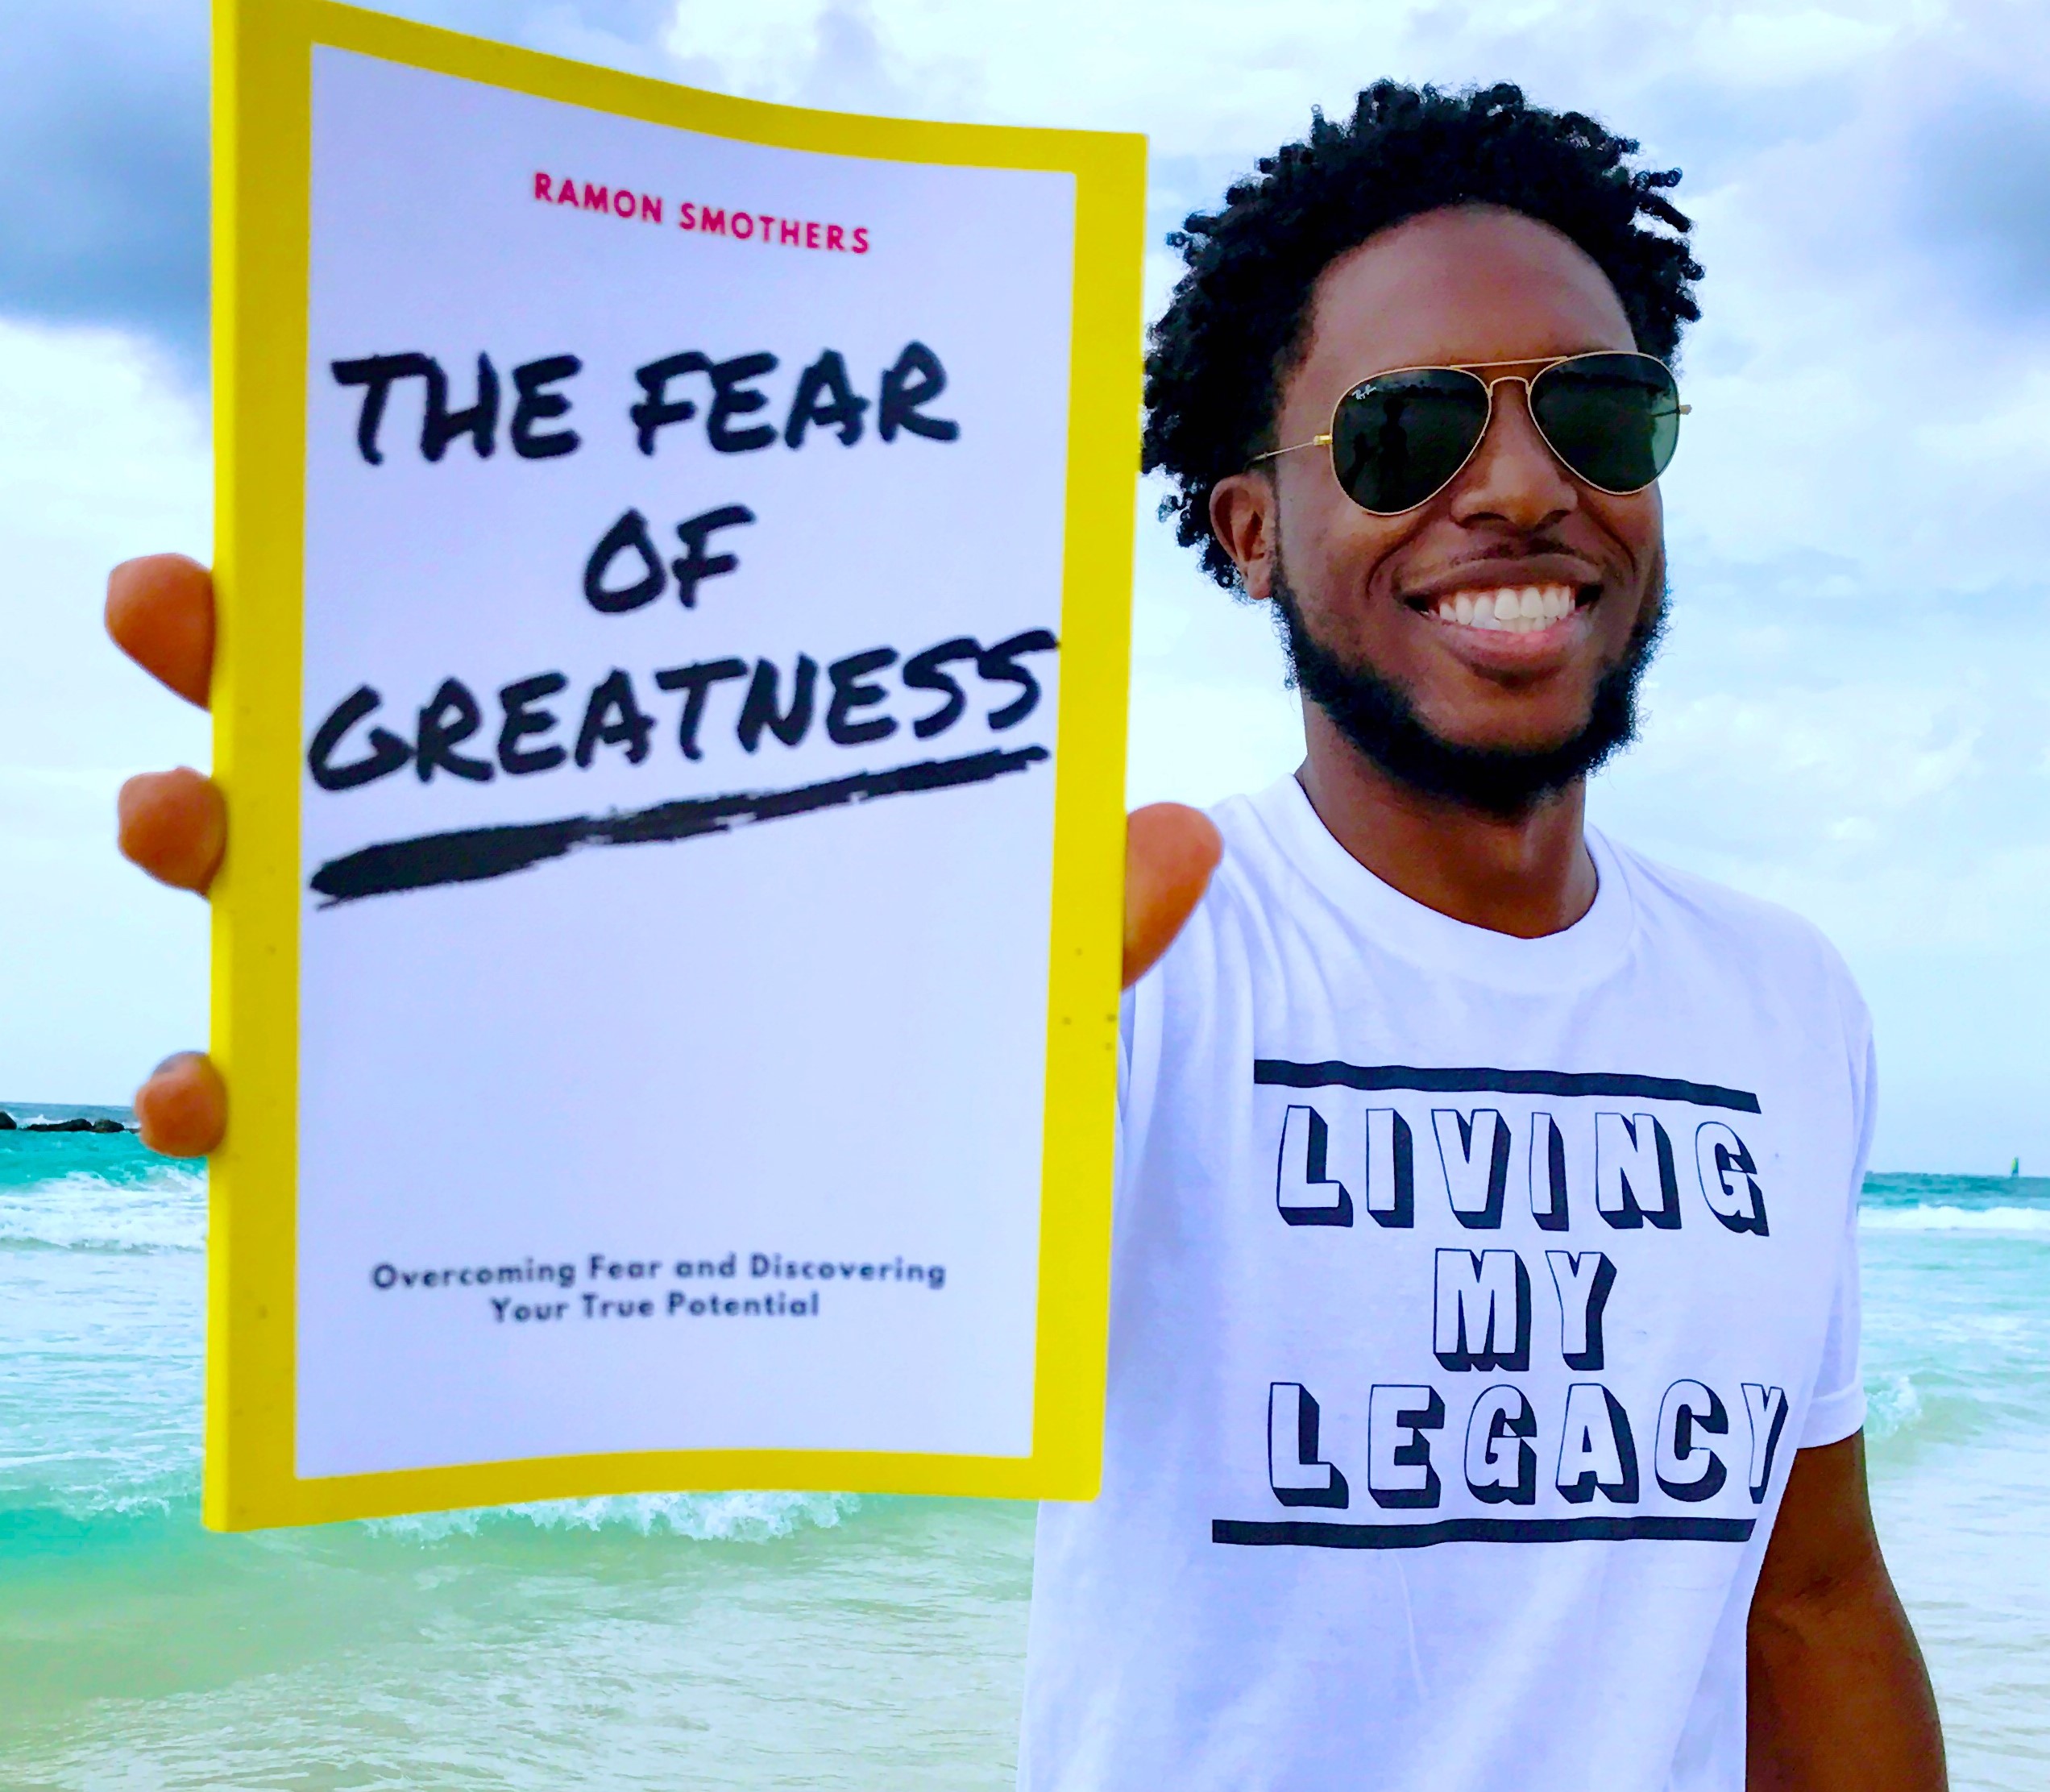 Ramon Smothers "Overcoming the Fear of Greatness" on The Erica Glessing Show Podcast #1218